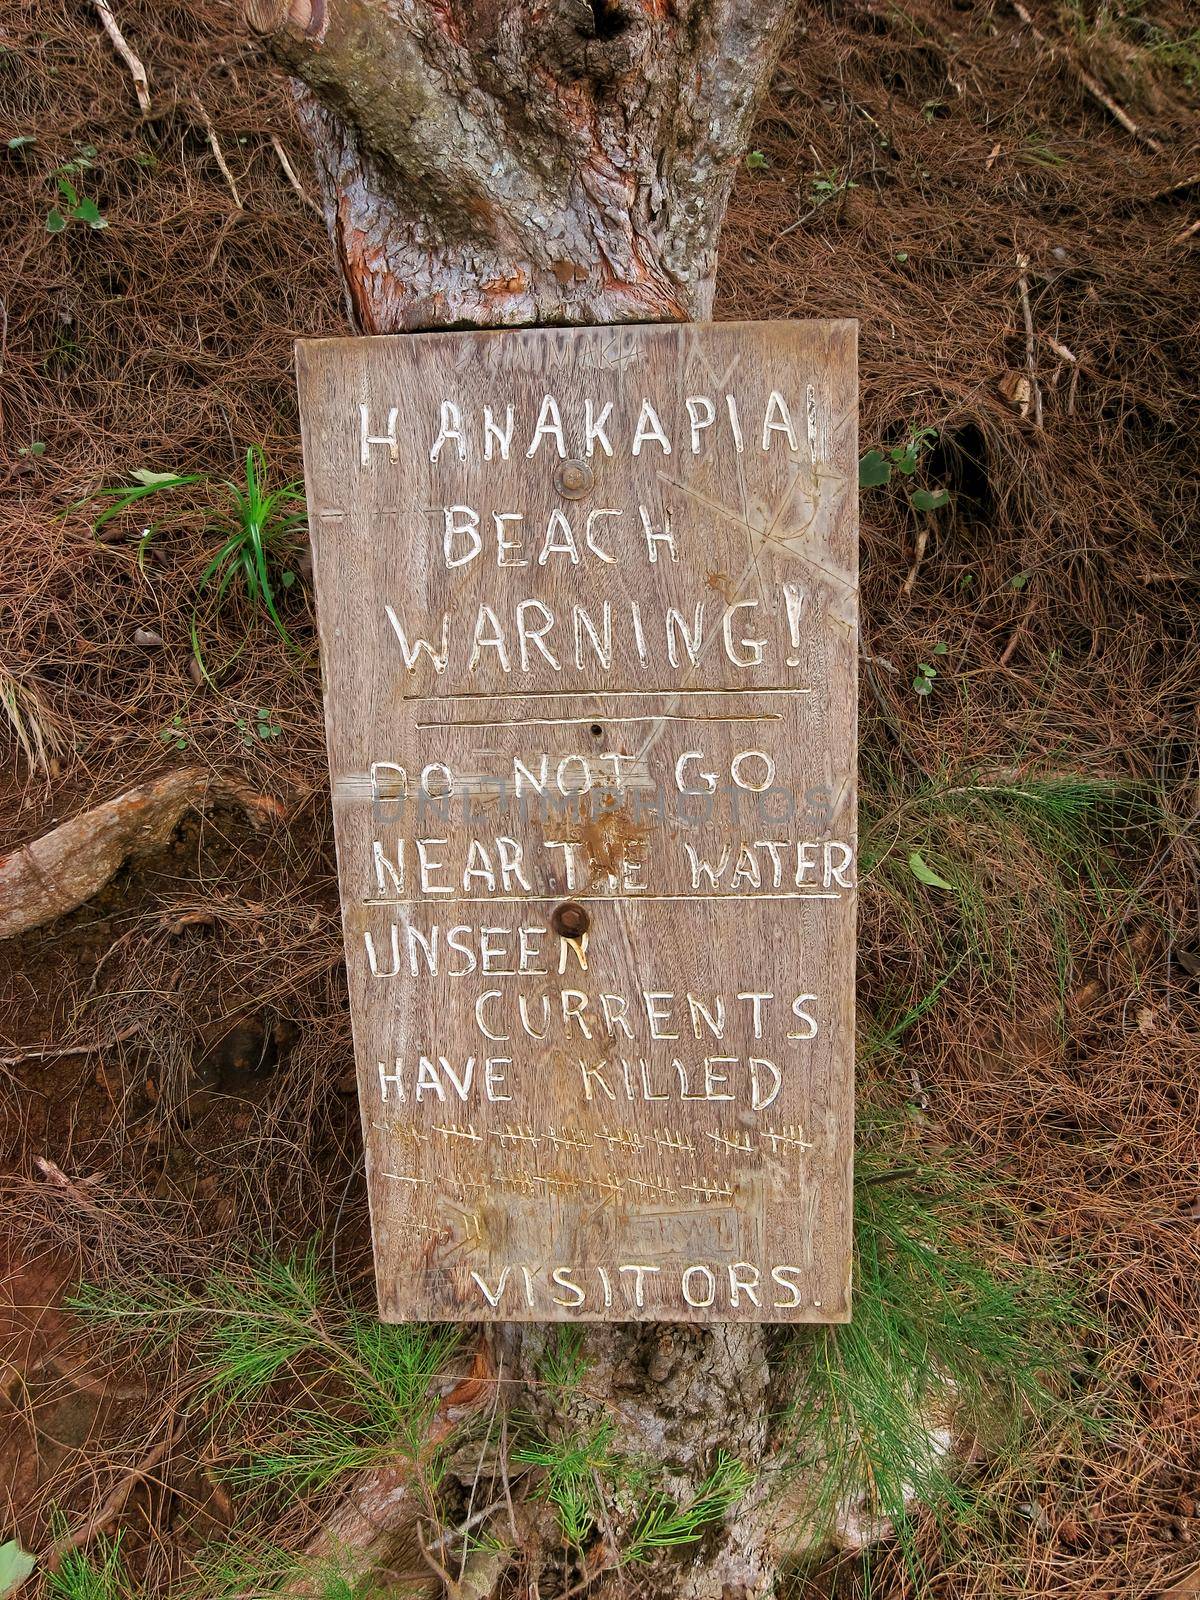 Hanakapiai Beach Wooden Sign Warning Sign Stating Do Not Go Near the Water Unseen Currents Have Killed a Large Number of Visitors Hanakapi'ai